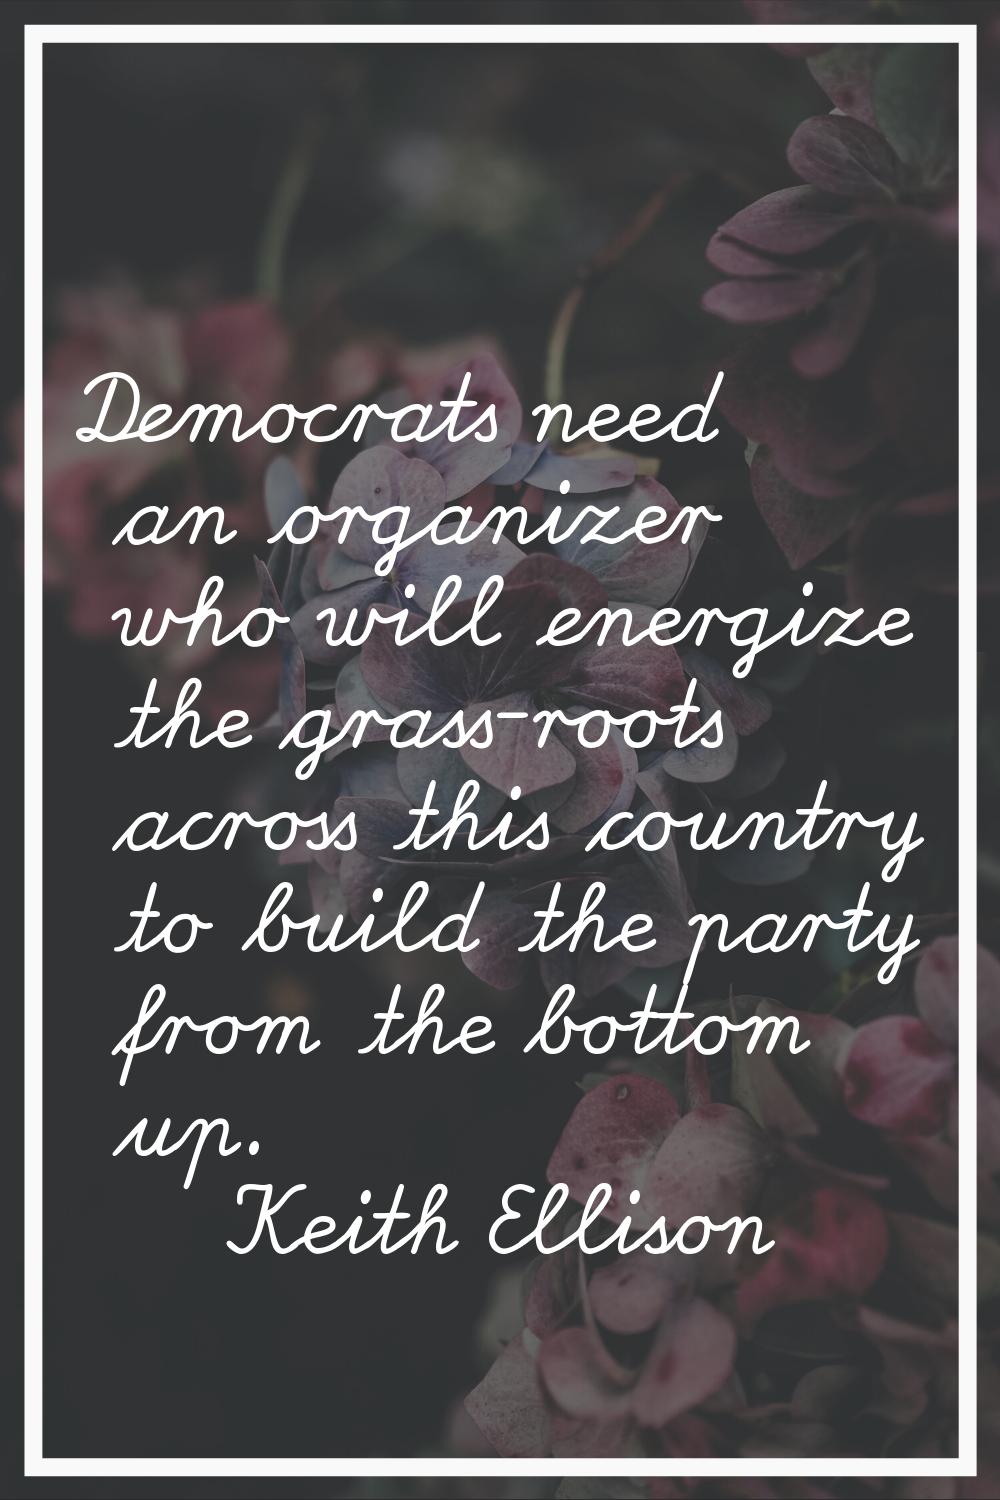 Democrats need an organizer who will energize the grass-roots across this country to build the part